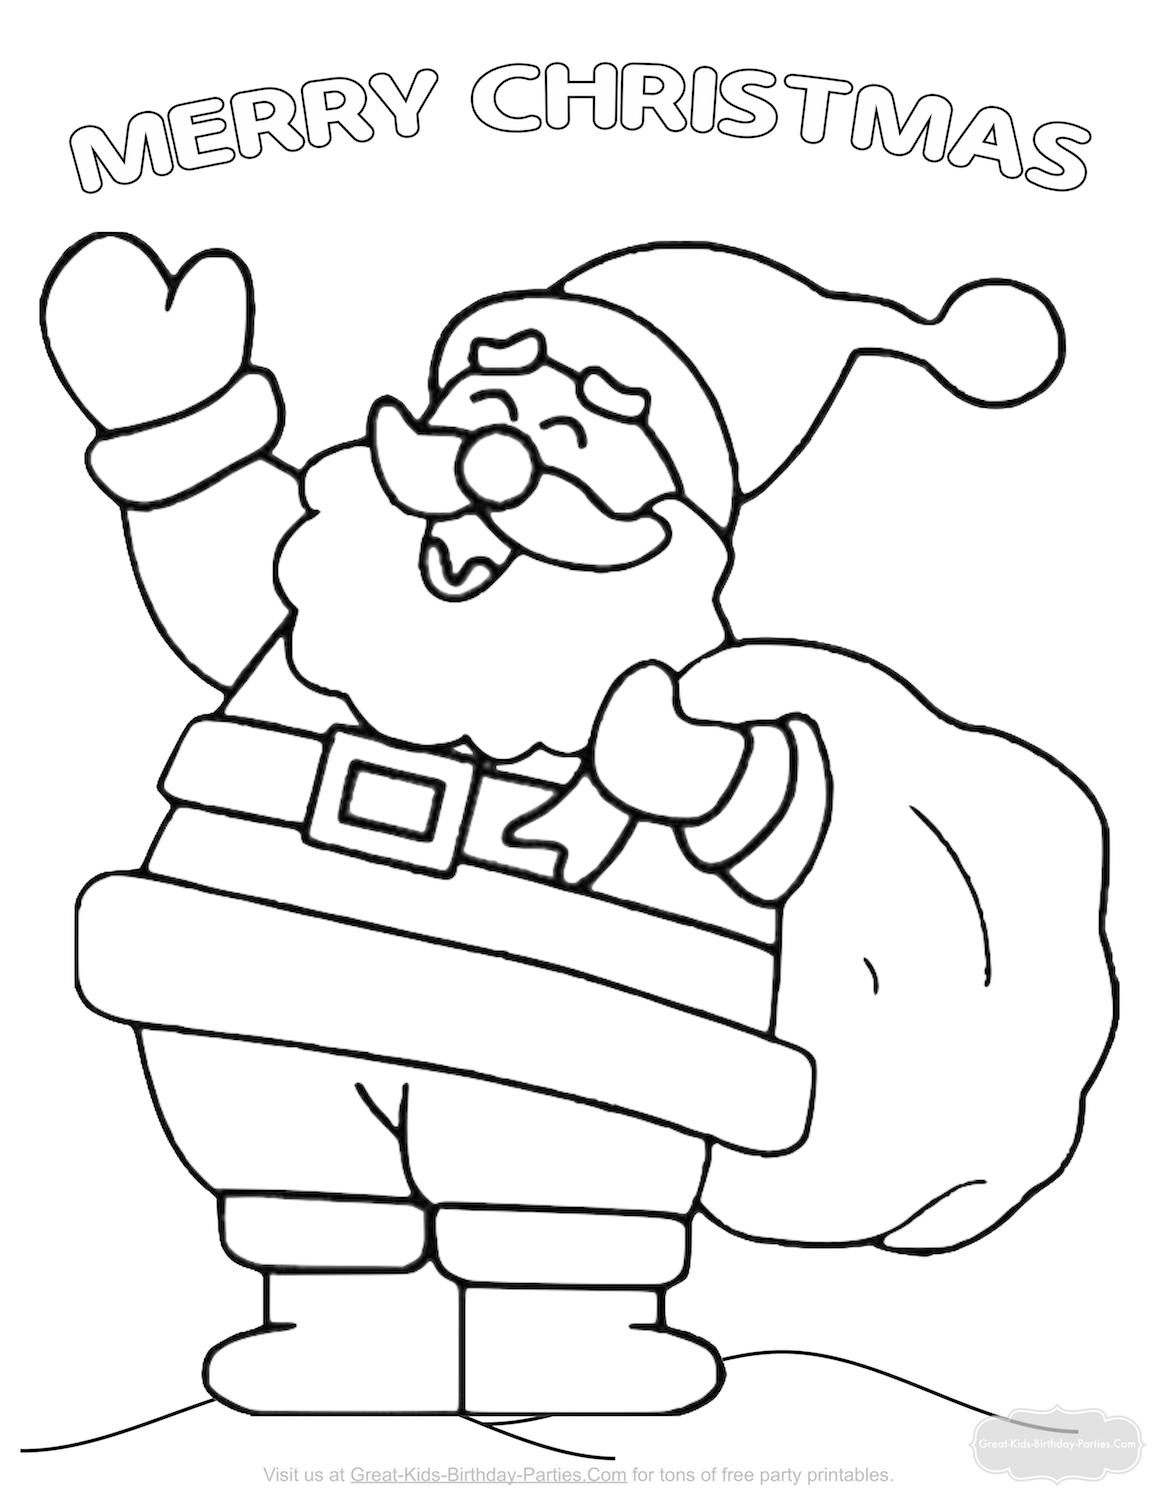 Christmas Coloring Pages | Fun Stuff For Kids | Free Christmas - Santa Coloring Pages Printable Free